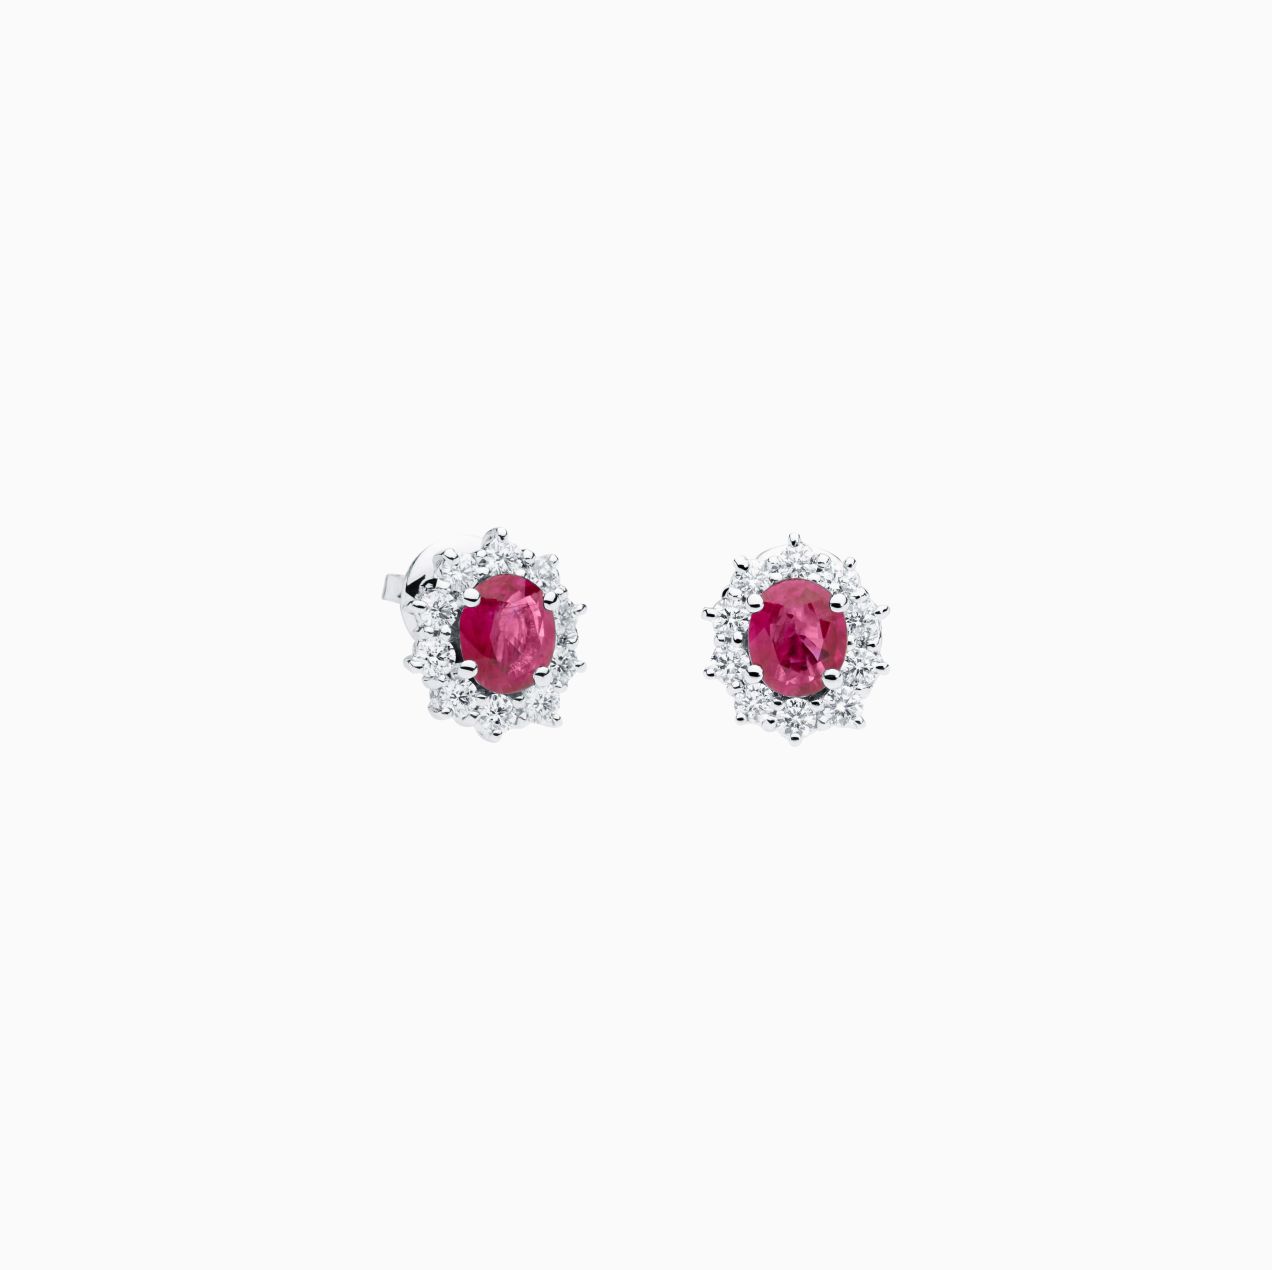 White gold earrings with ruby and diamonds